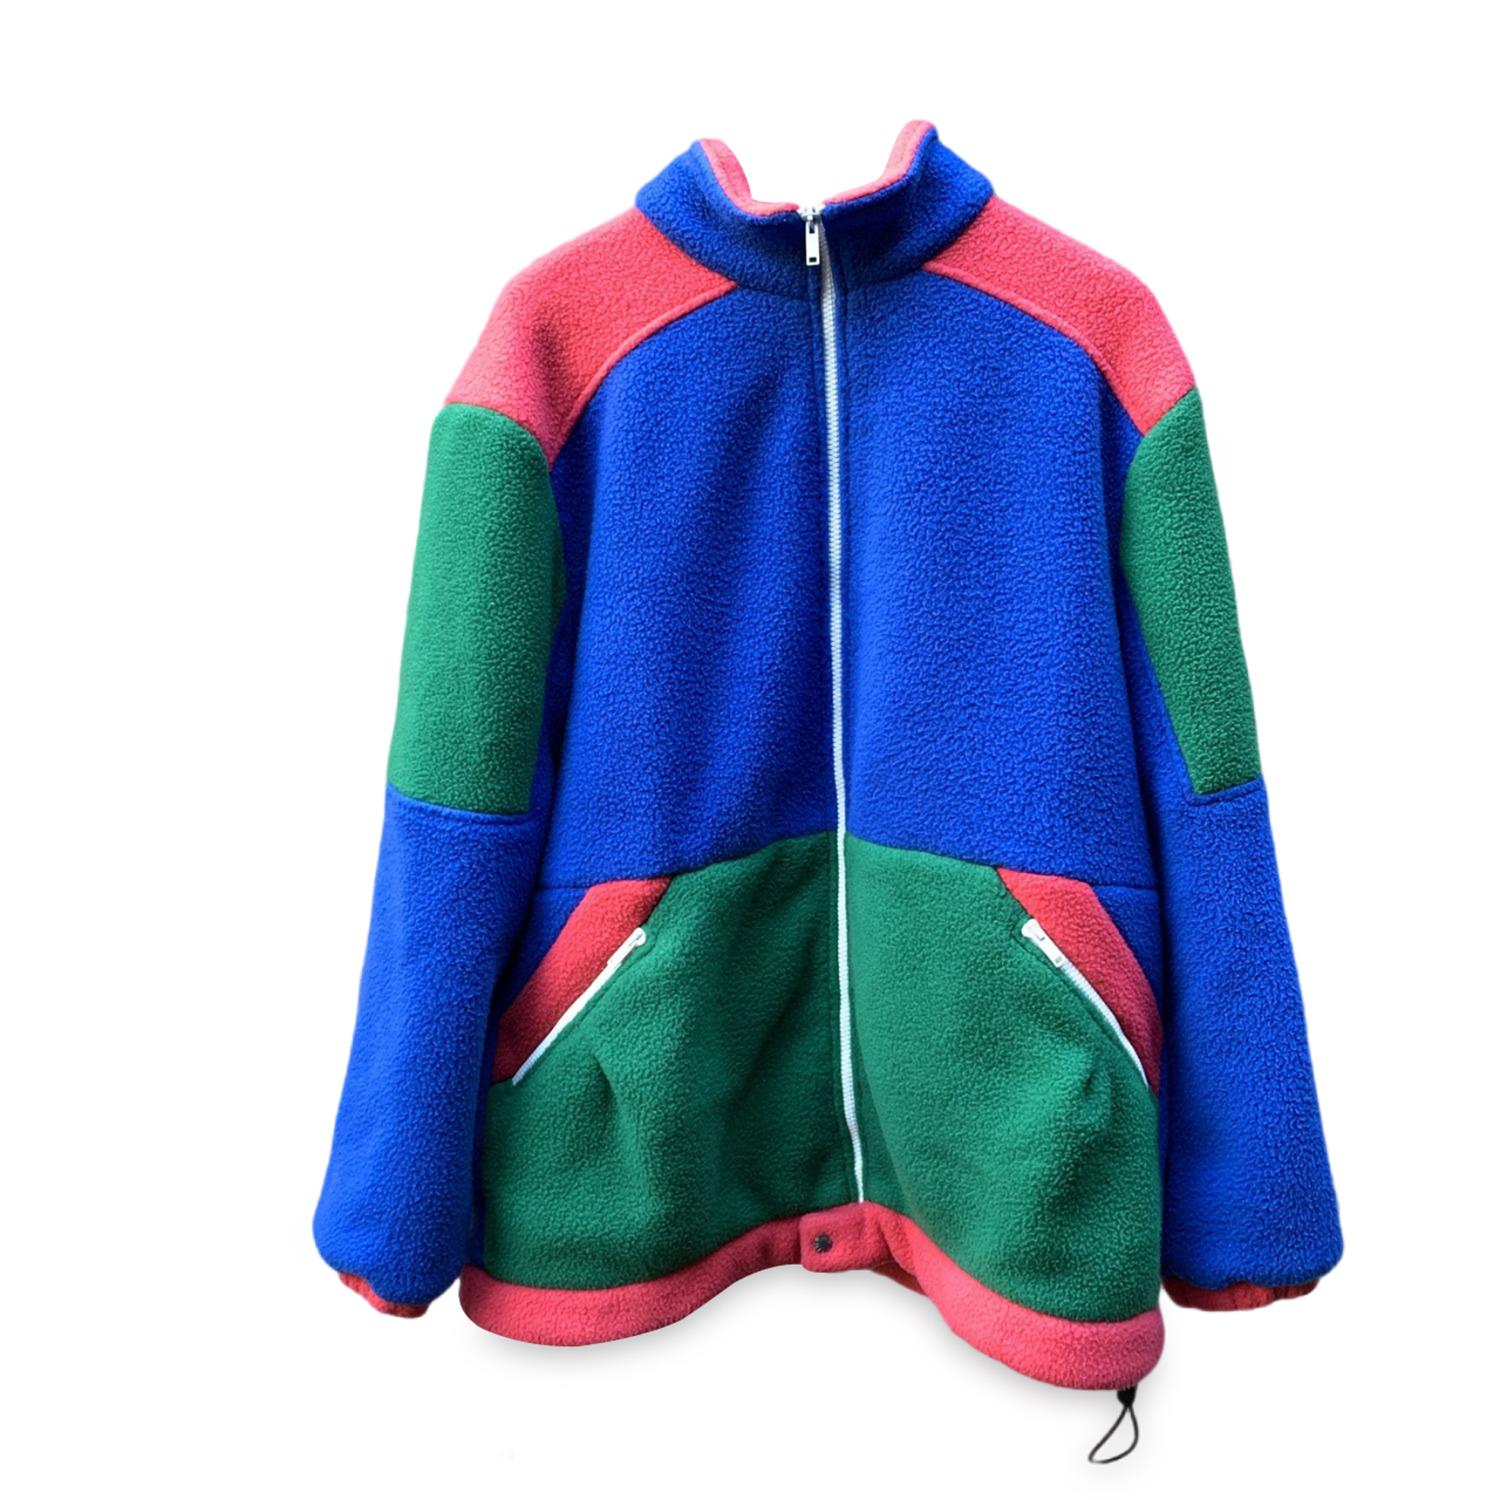 Oversized fleece jacket by Gucci x The North Face. It features a colorblock design in green, blue and pink color, fornt zip closure and 2 side zip pockets. Drawstring on the hem. Nylon lining. Multicolored logo embroidery on the back. Size: XL (The